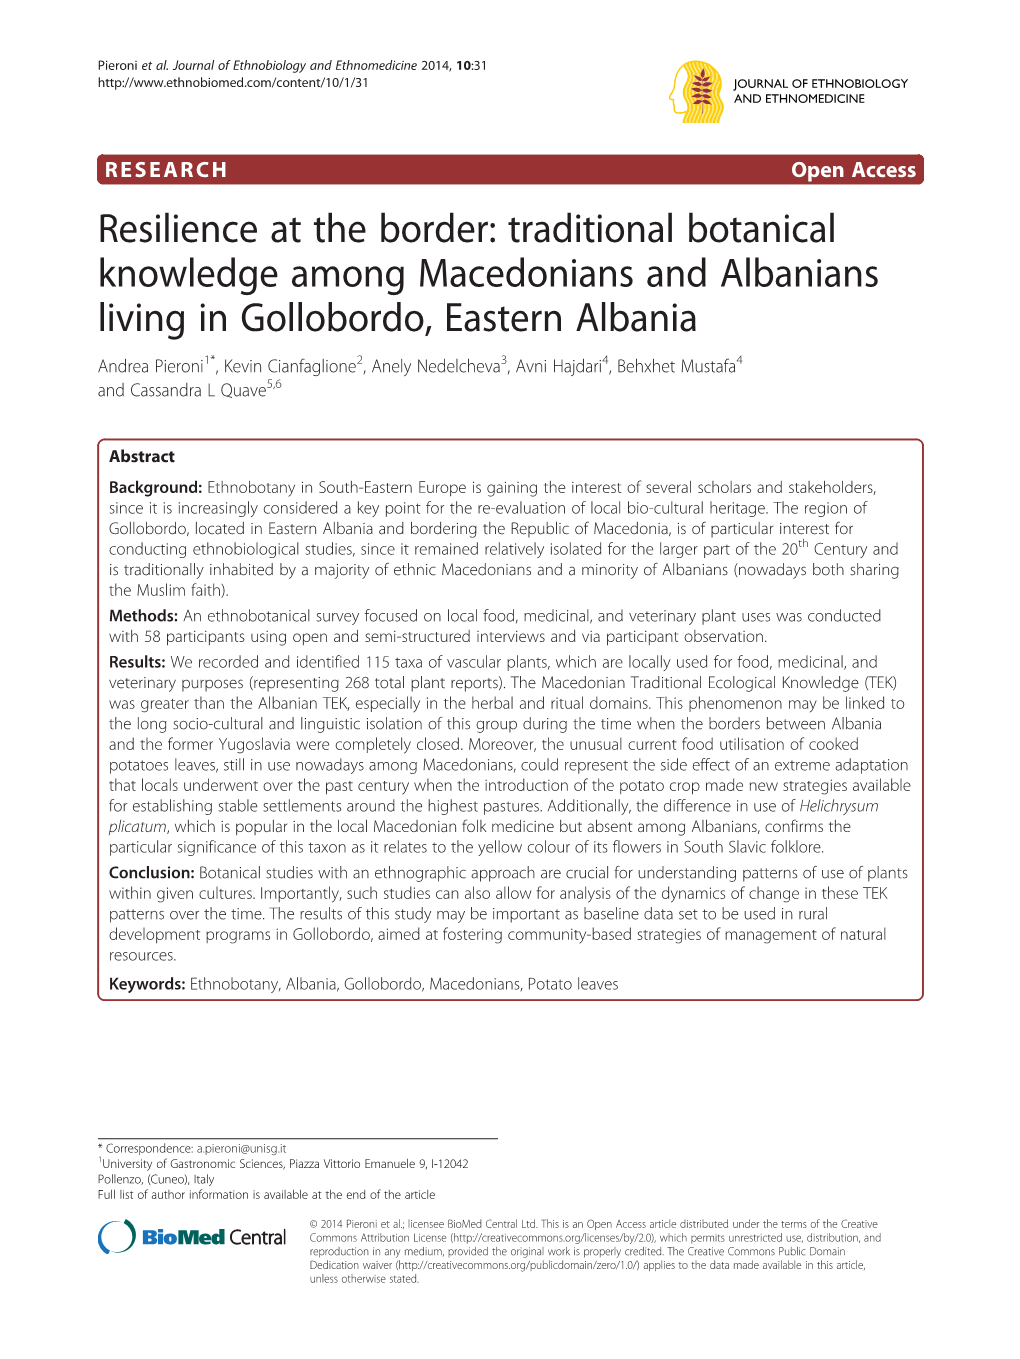 Resilience at the Border: Traditional Botanical Knowledge Among Macedonians and Albanians Living in Gollobordo, Eastern Albania